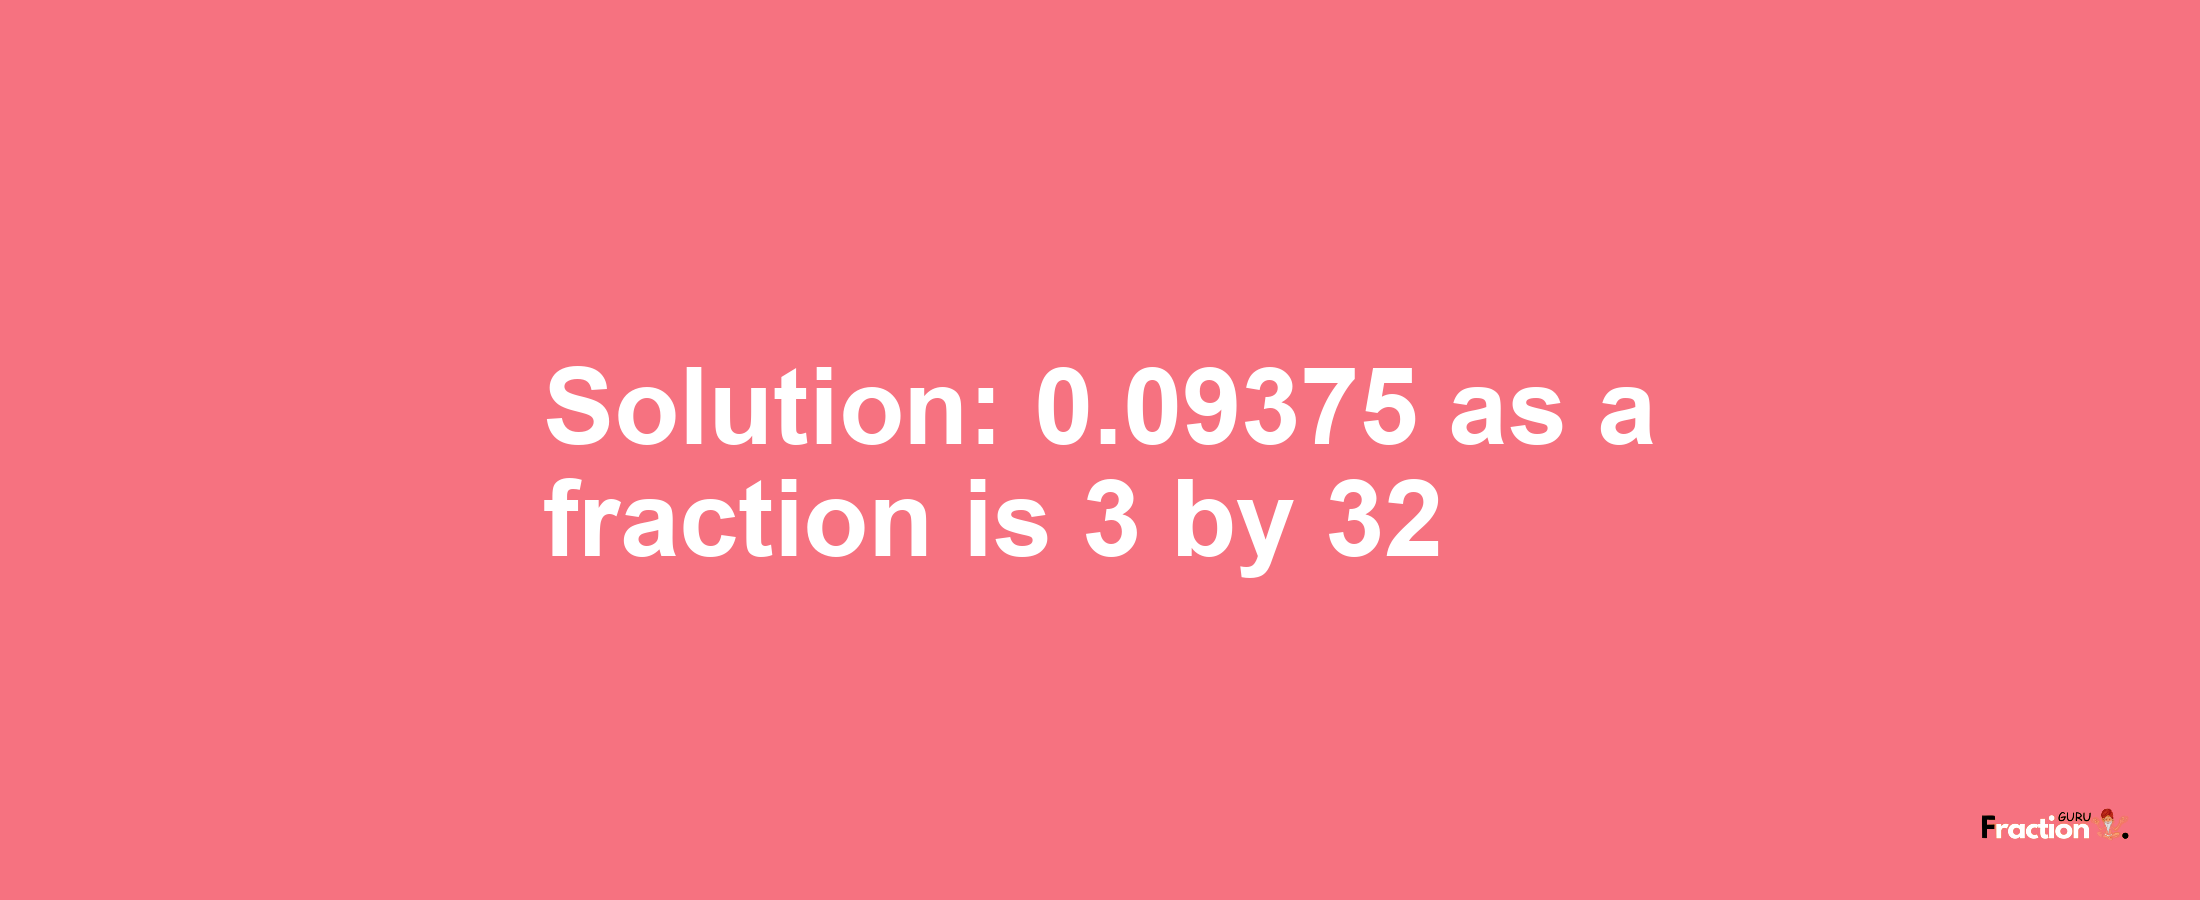 Solution:0.09375 as a fraction is 3/32